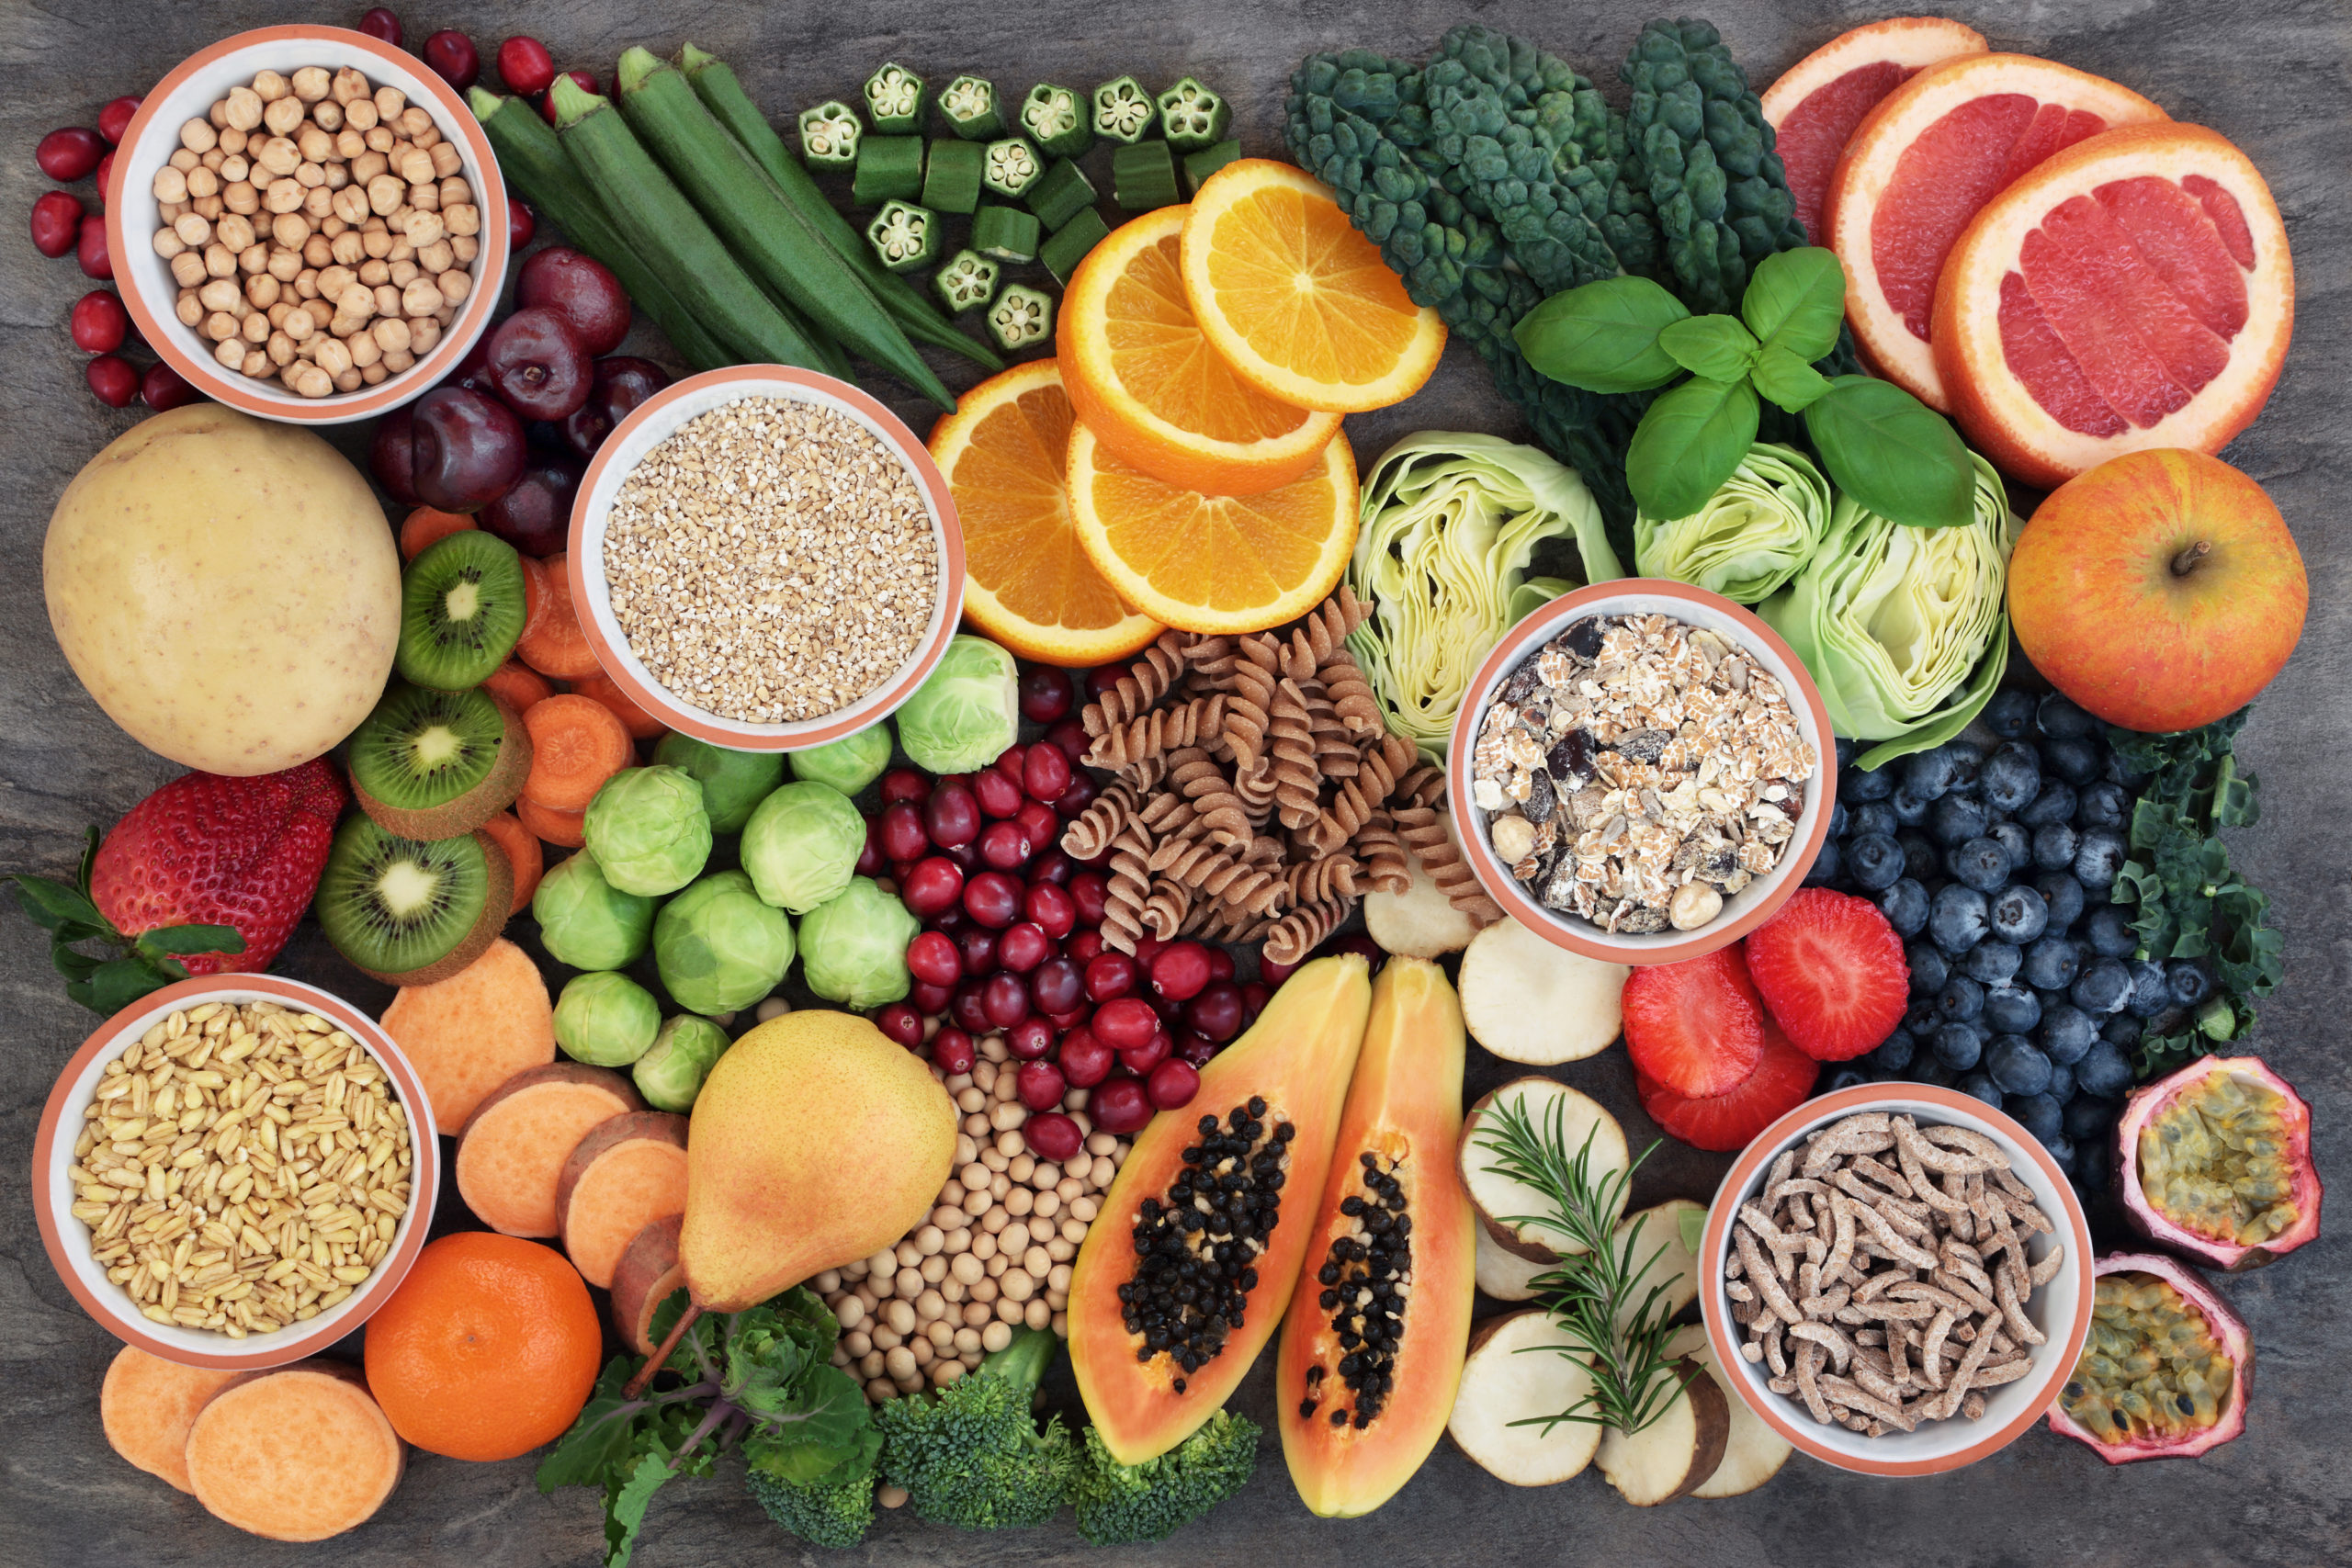 How Much Fiber Is Too Much? Effects, Treatment, and More